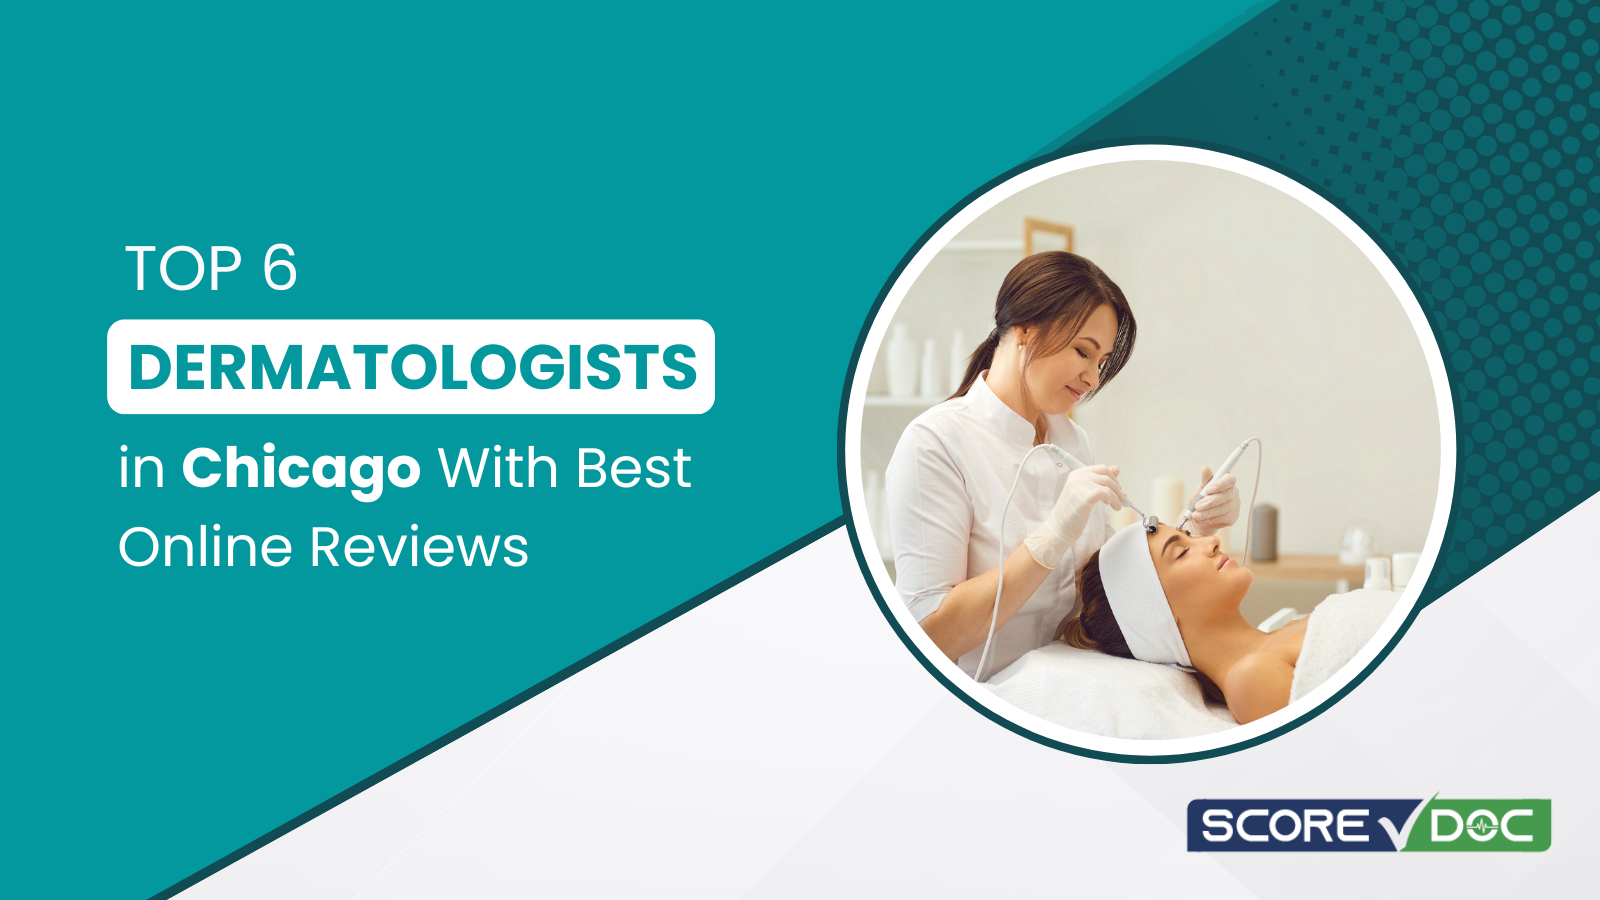 Top 6 Dermatologists in Chicago With Best Online Reviews